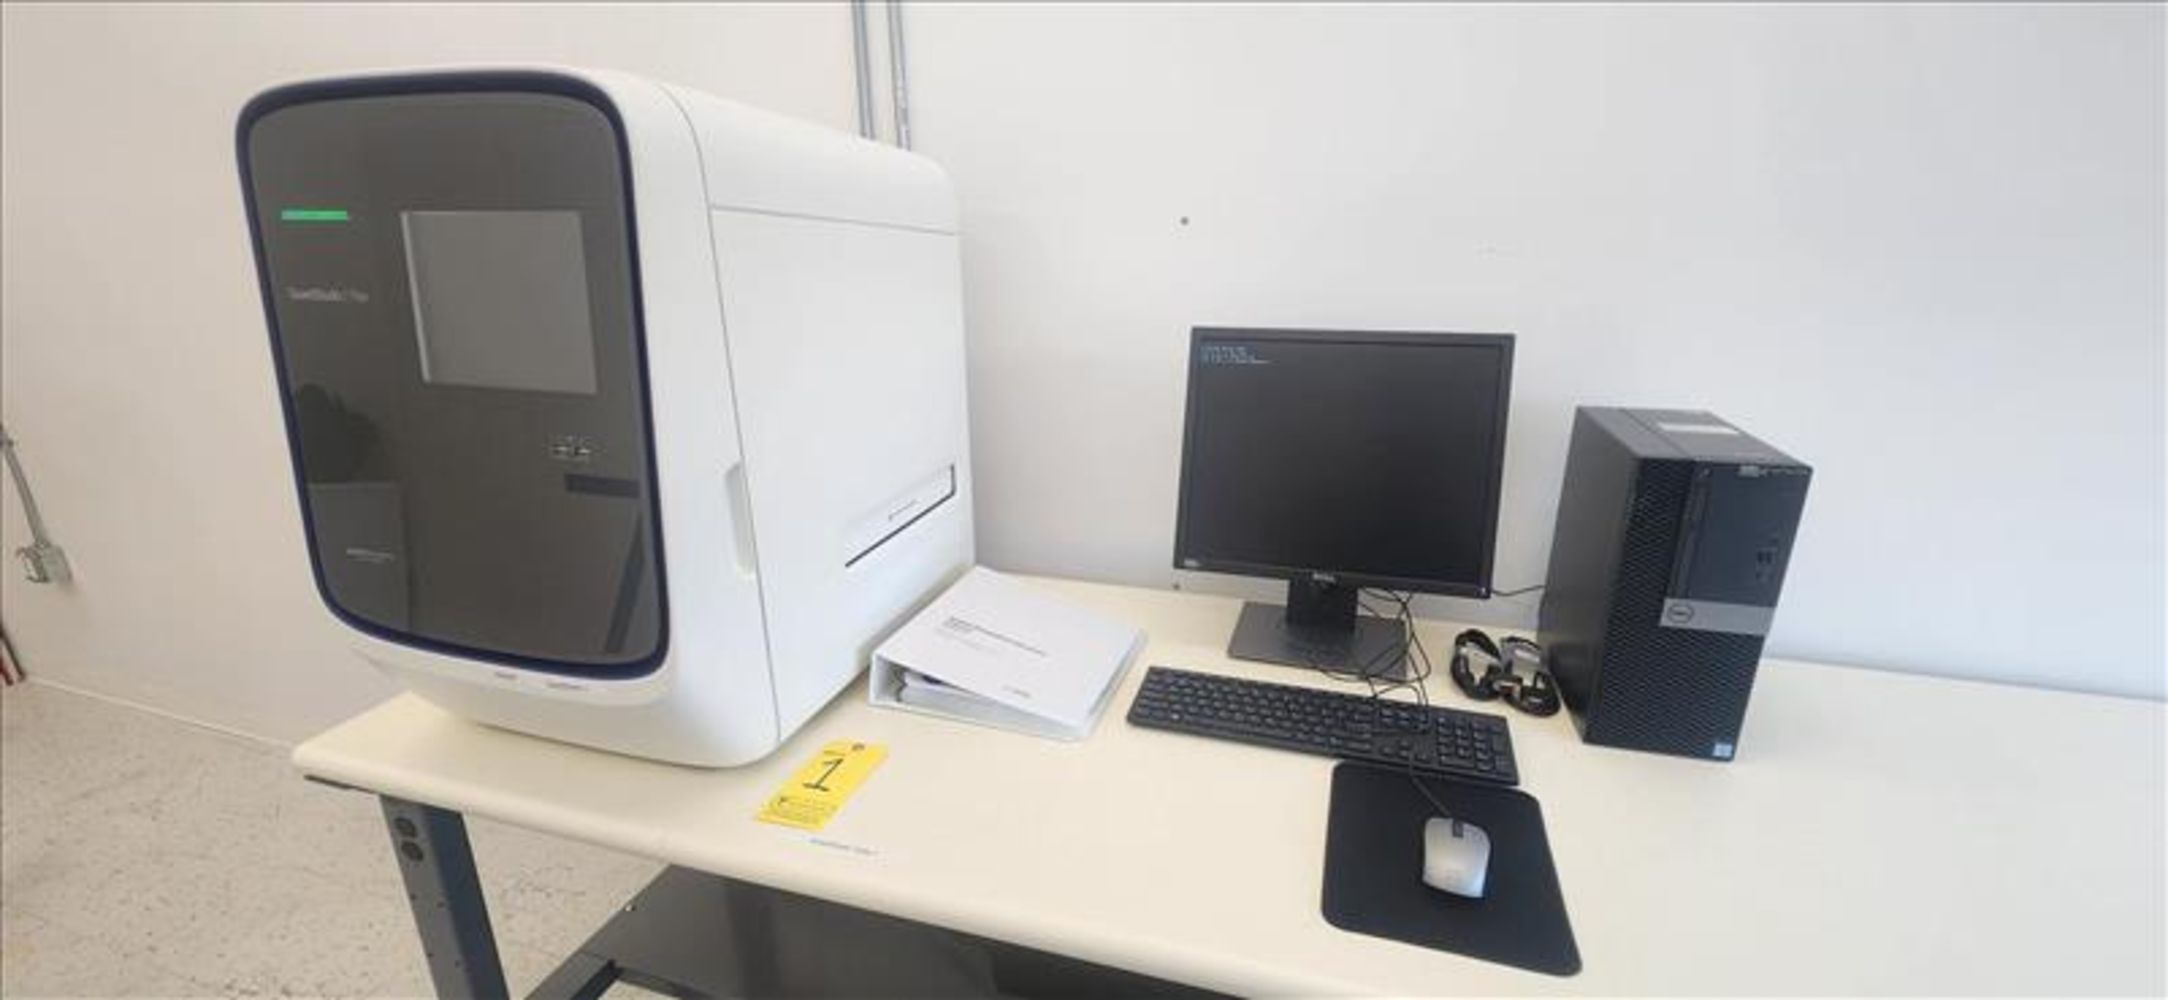 Complete Biotech and Laboratory Testing Facility -  Surplus to Flow Health Covid Testing / Pathology